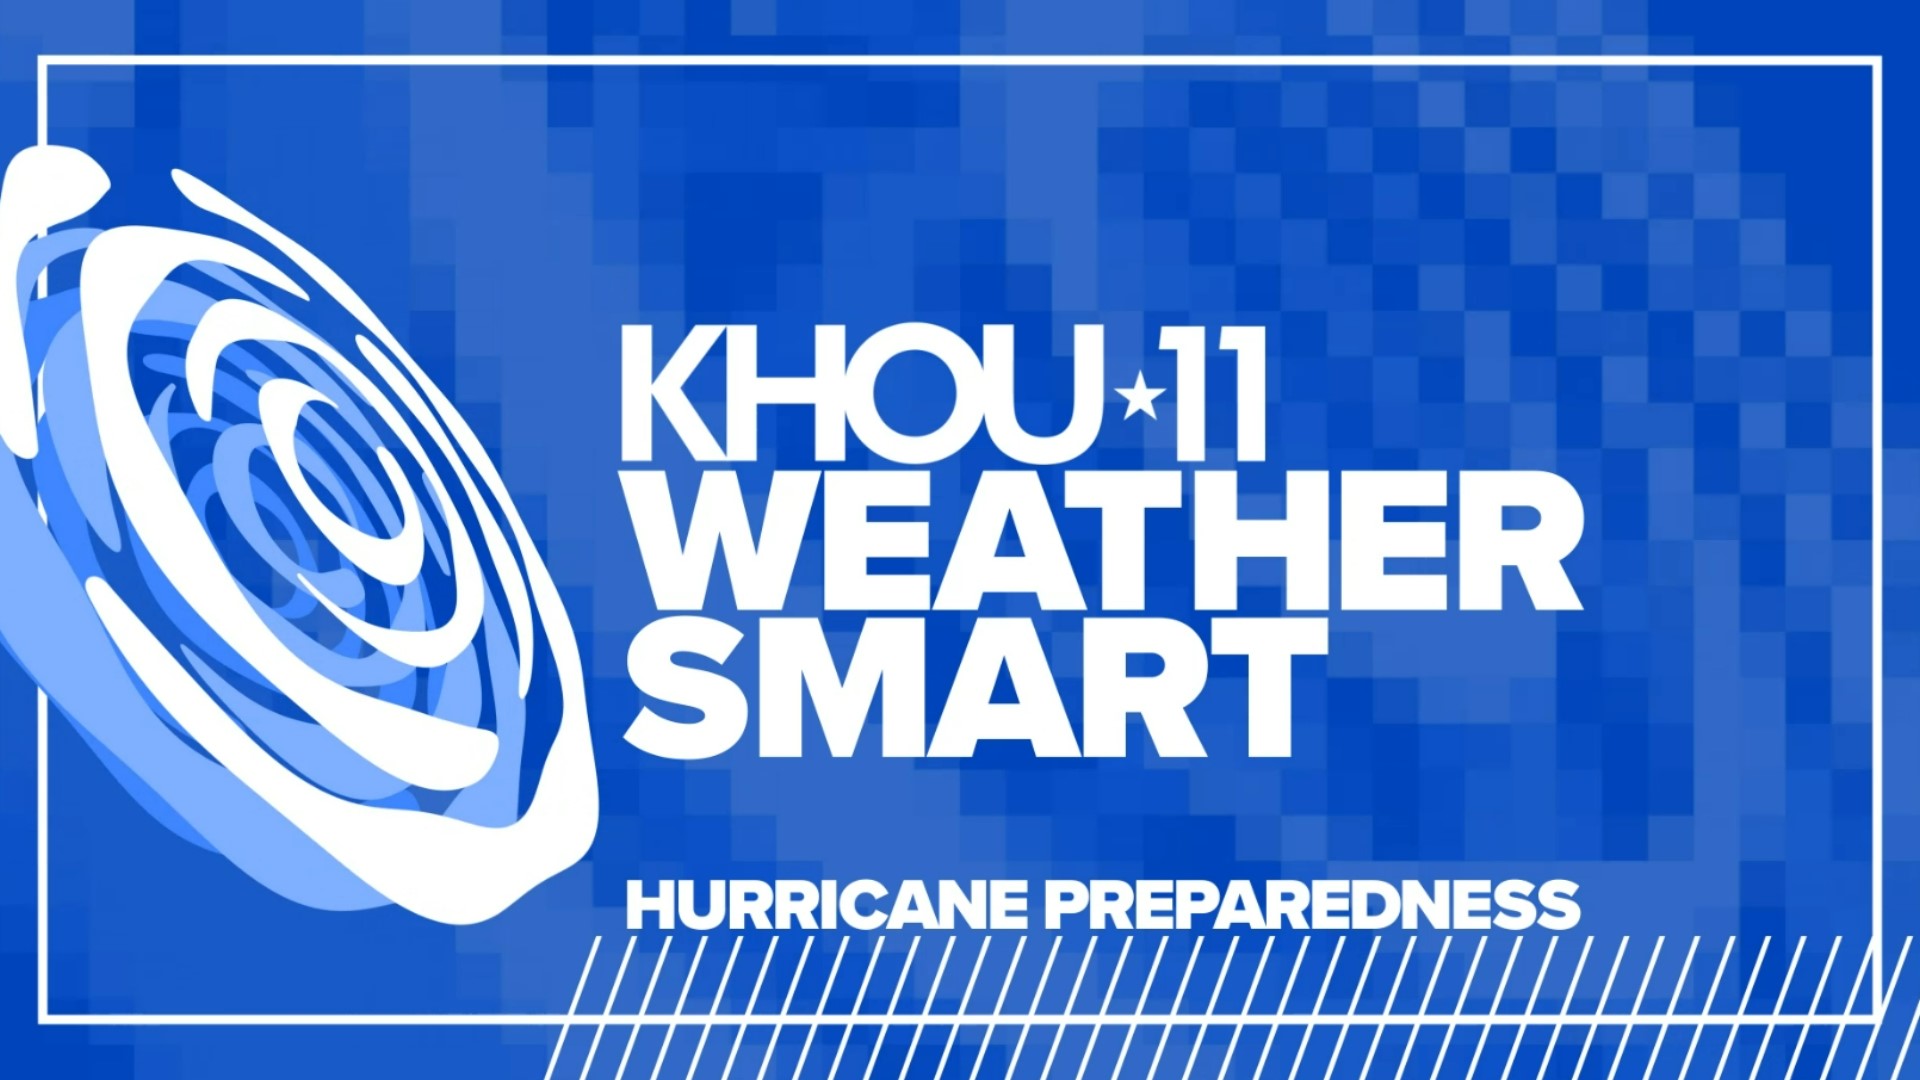 KHOU 11's weather team has what you need to know to be ready if a storm comes our way.